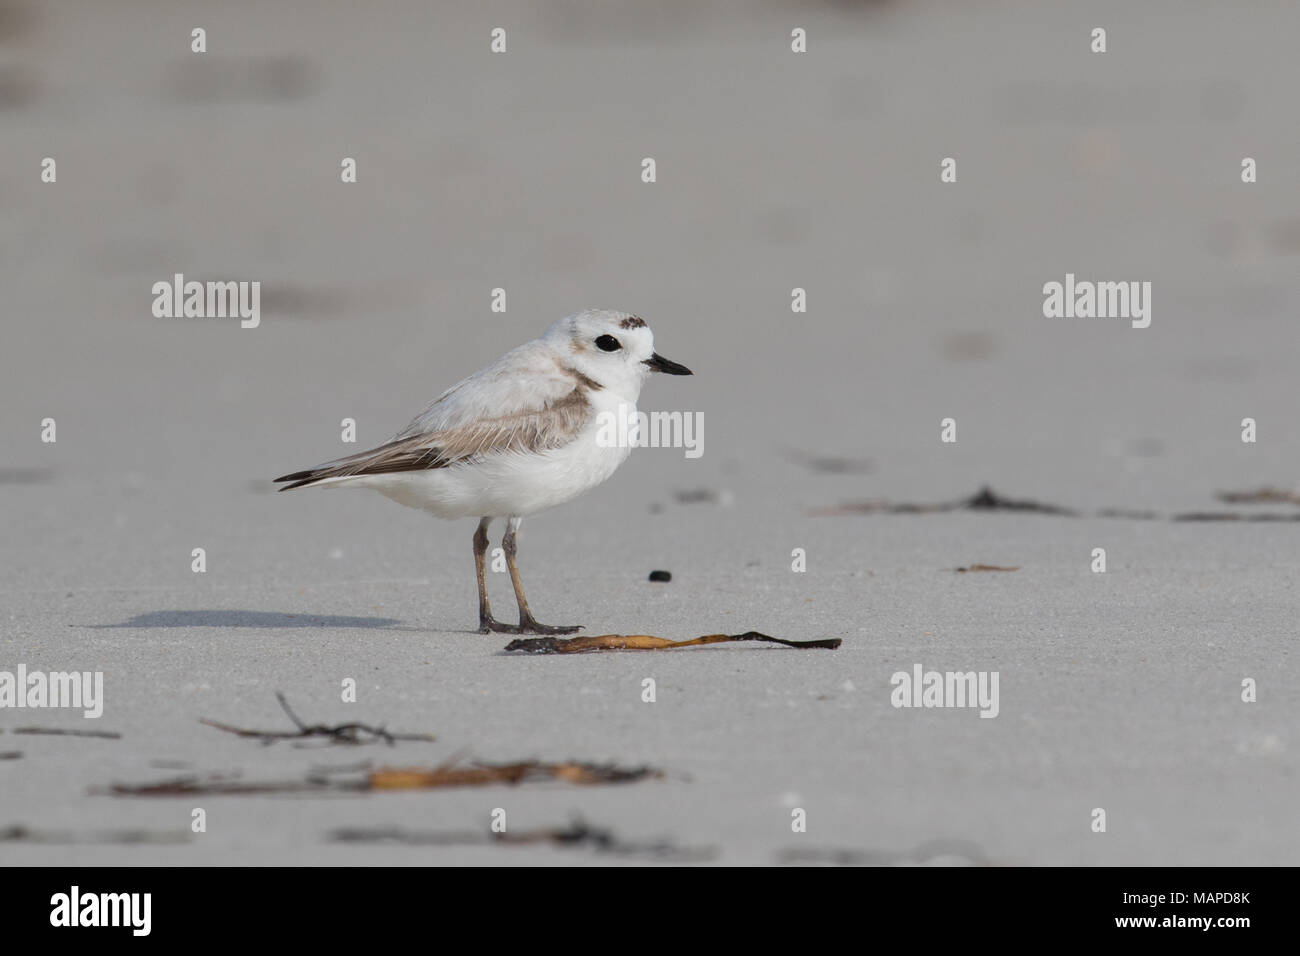 A snowy plover standing on a beach. Stock Photo